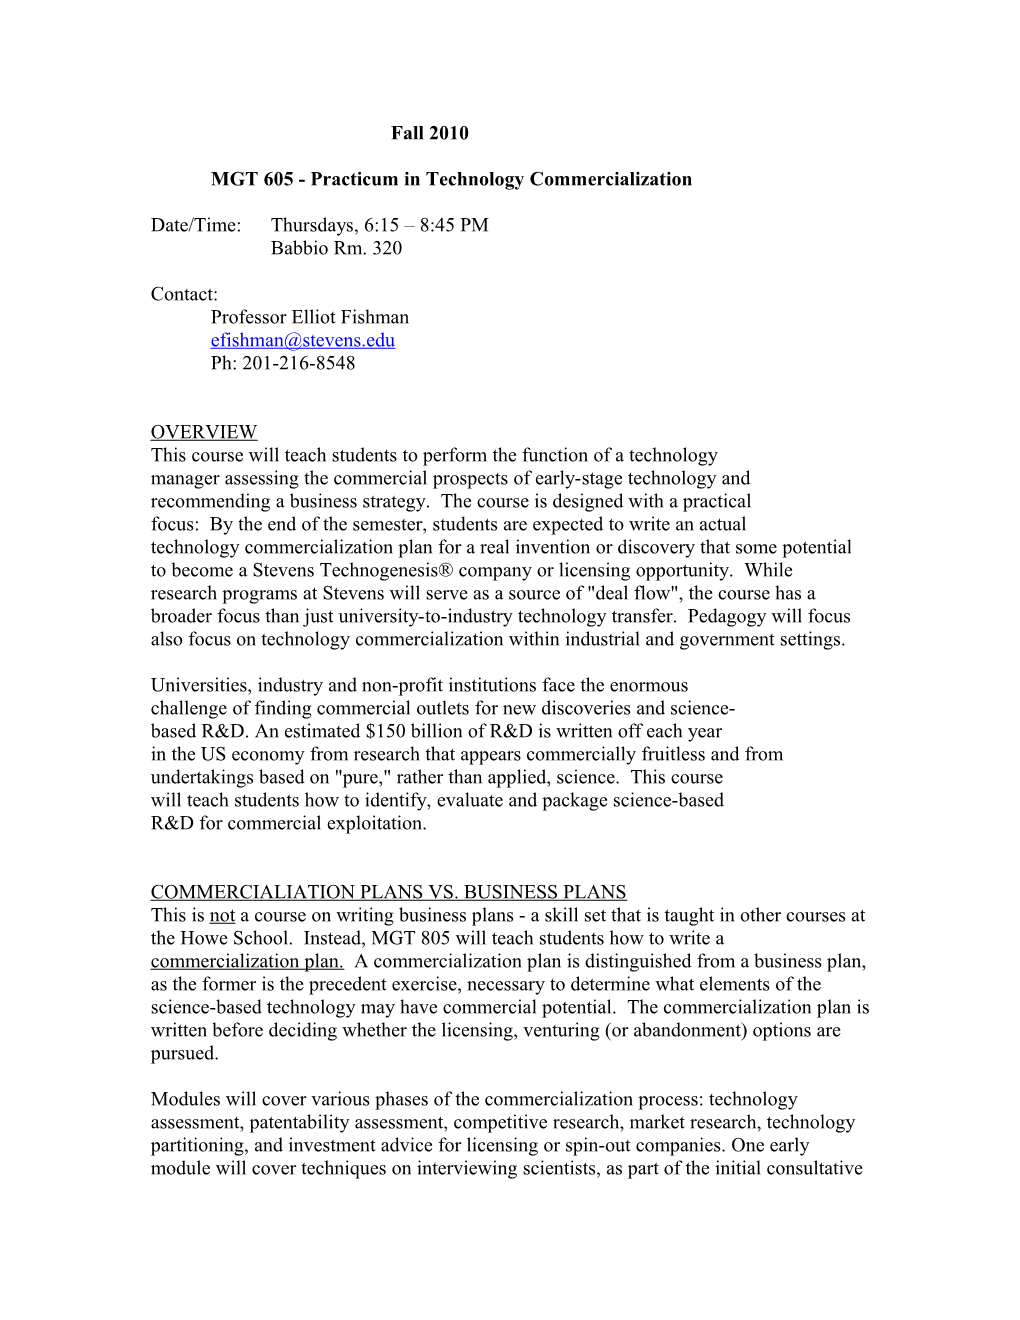 MGT 800C - Practicum in Technology Commercialization